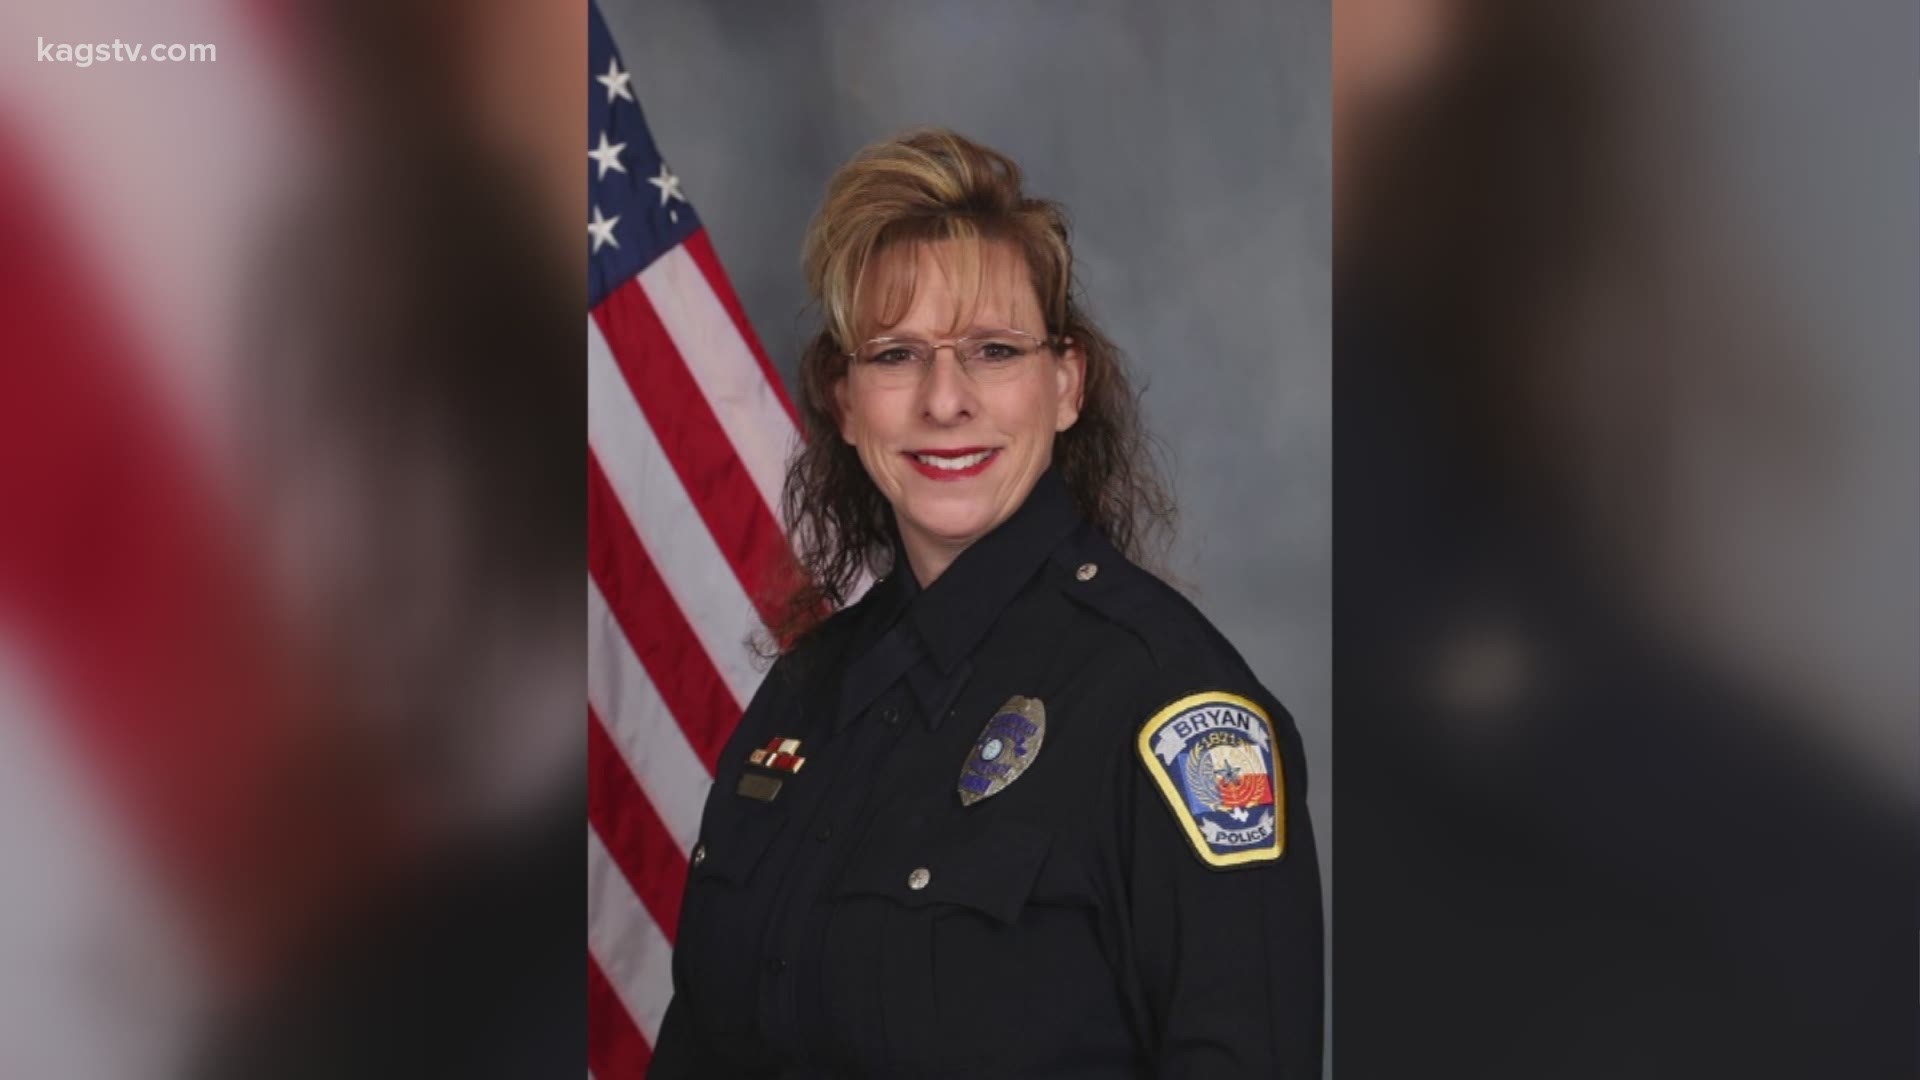 Bryan Police Department PIO retires after 20 years